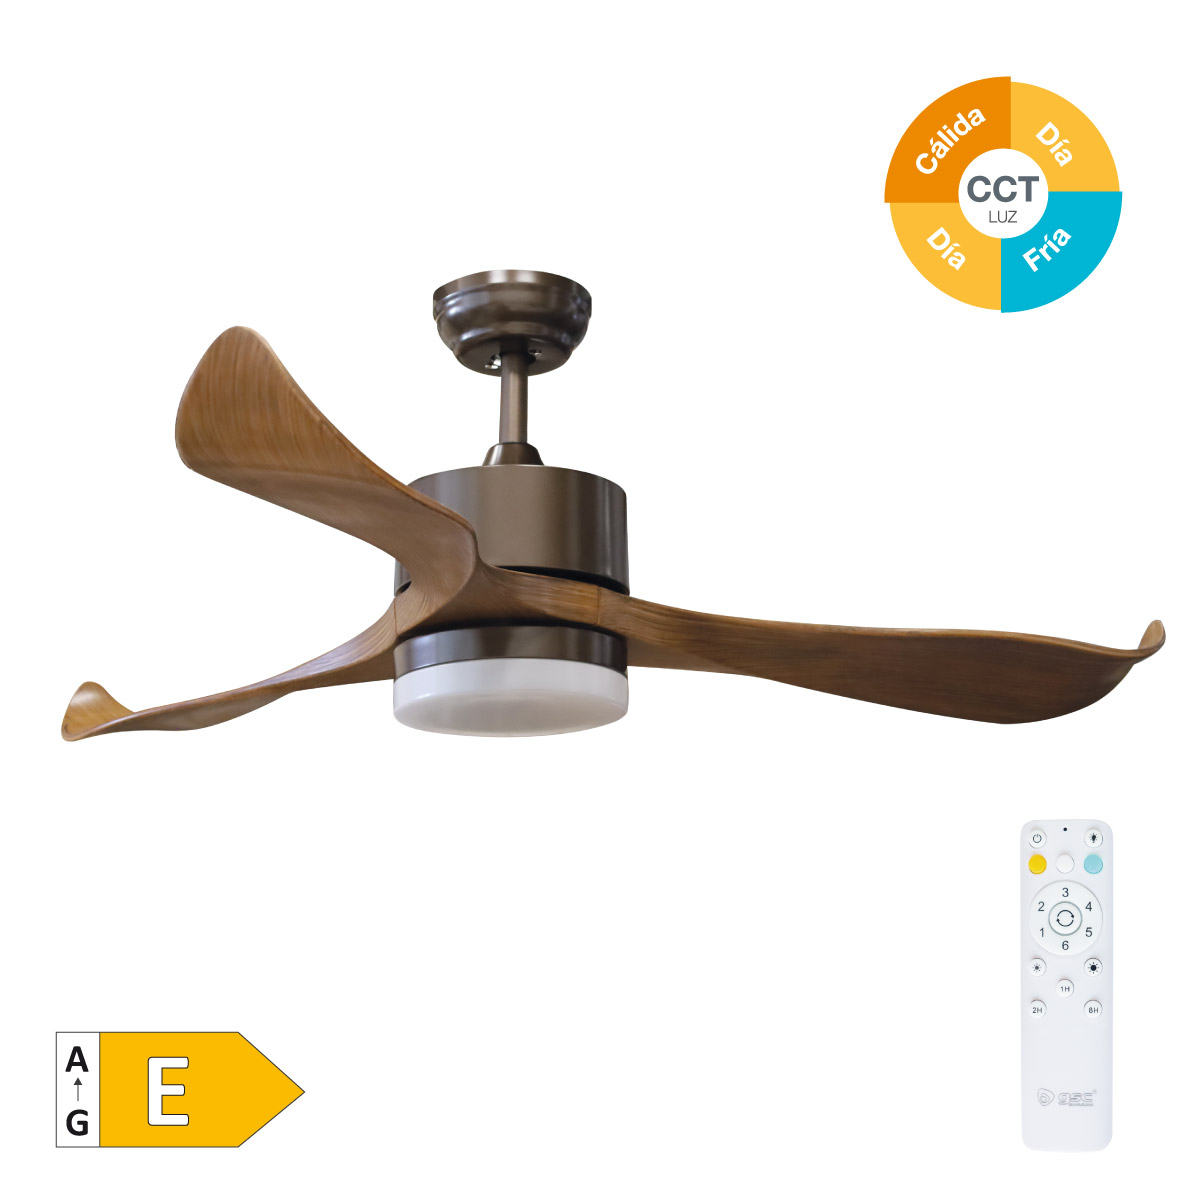 52' DC ceiling fan with remote control CCT 3 blades Wood effect